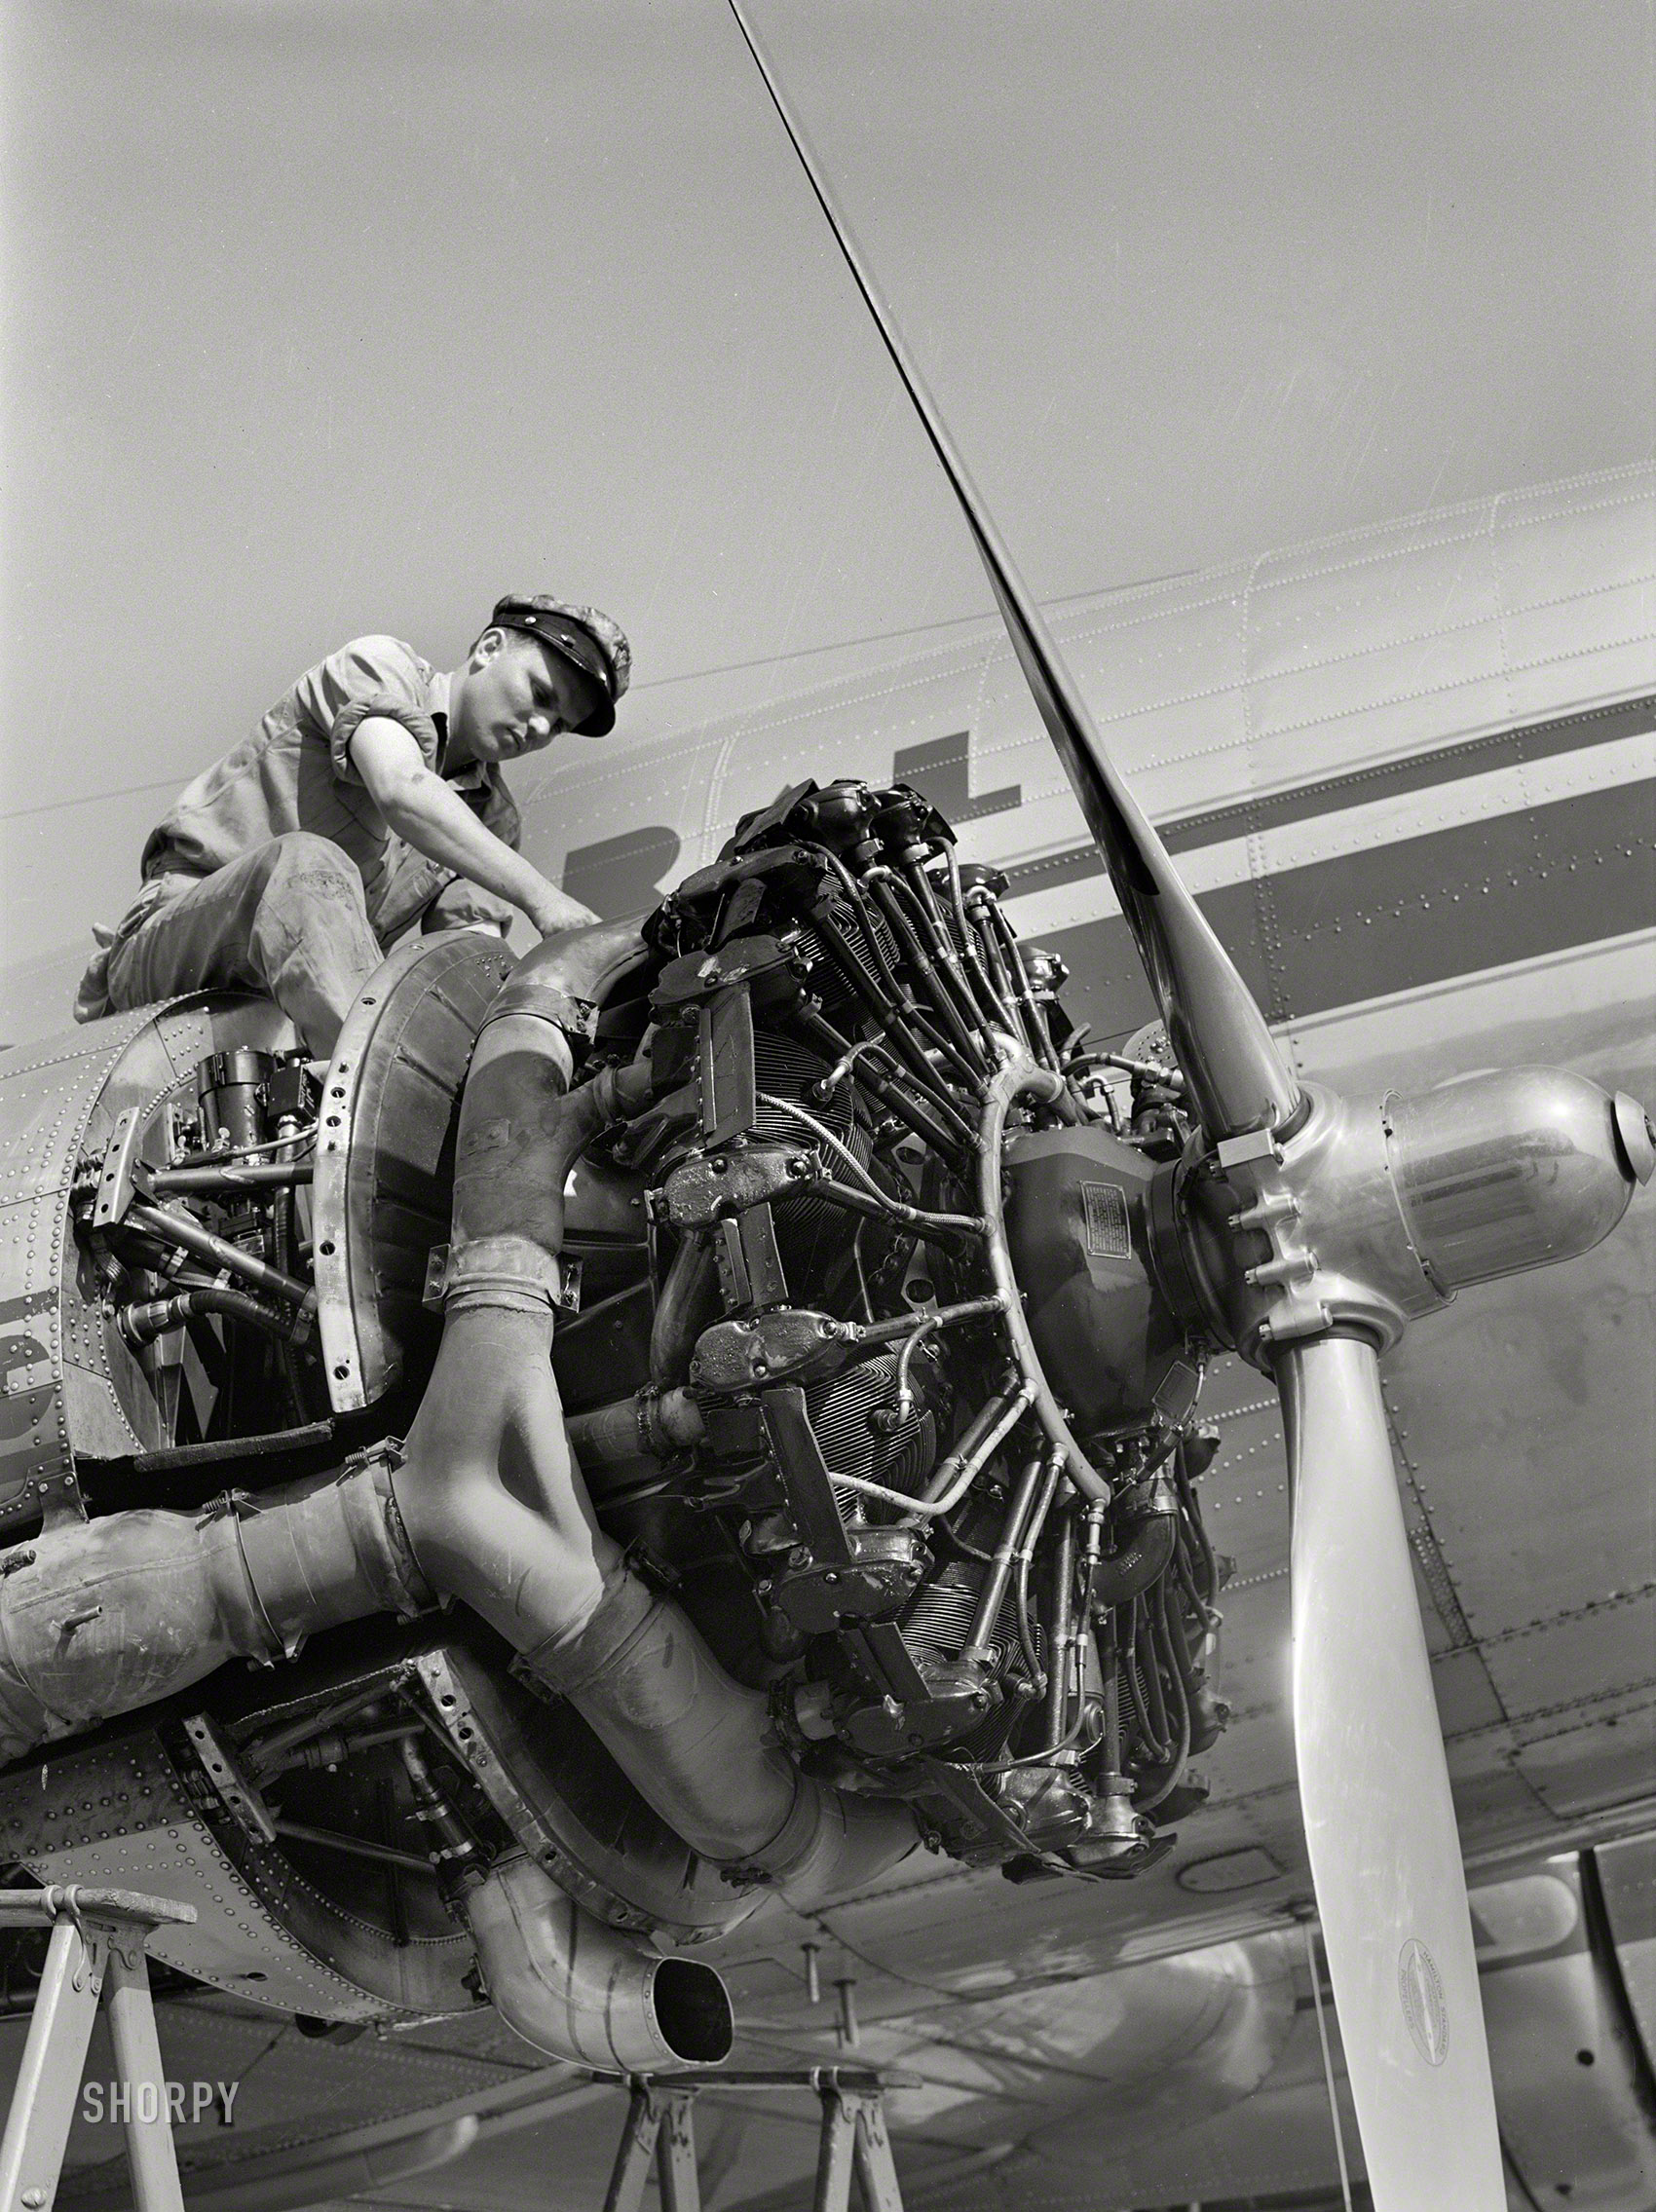 July 1941. "Working on an engine of one of the airliners. Municipal airport, Washington, D.C." Acetate negative by Jack Delano. View full size.